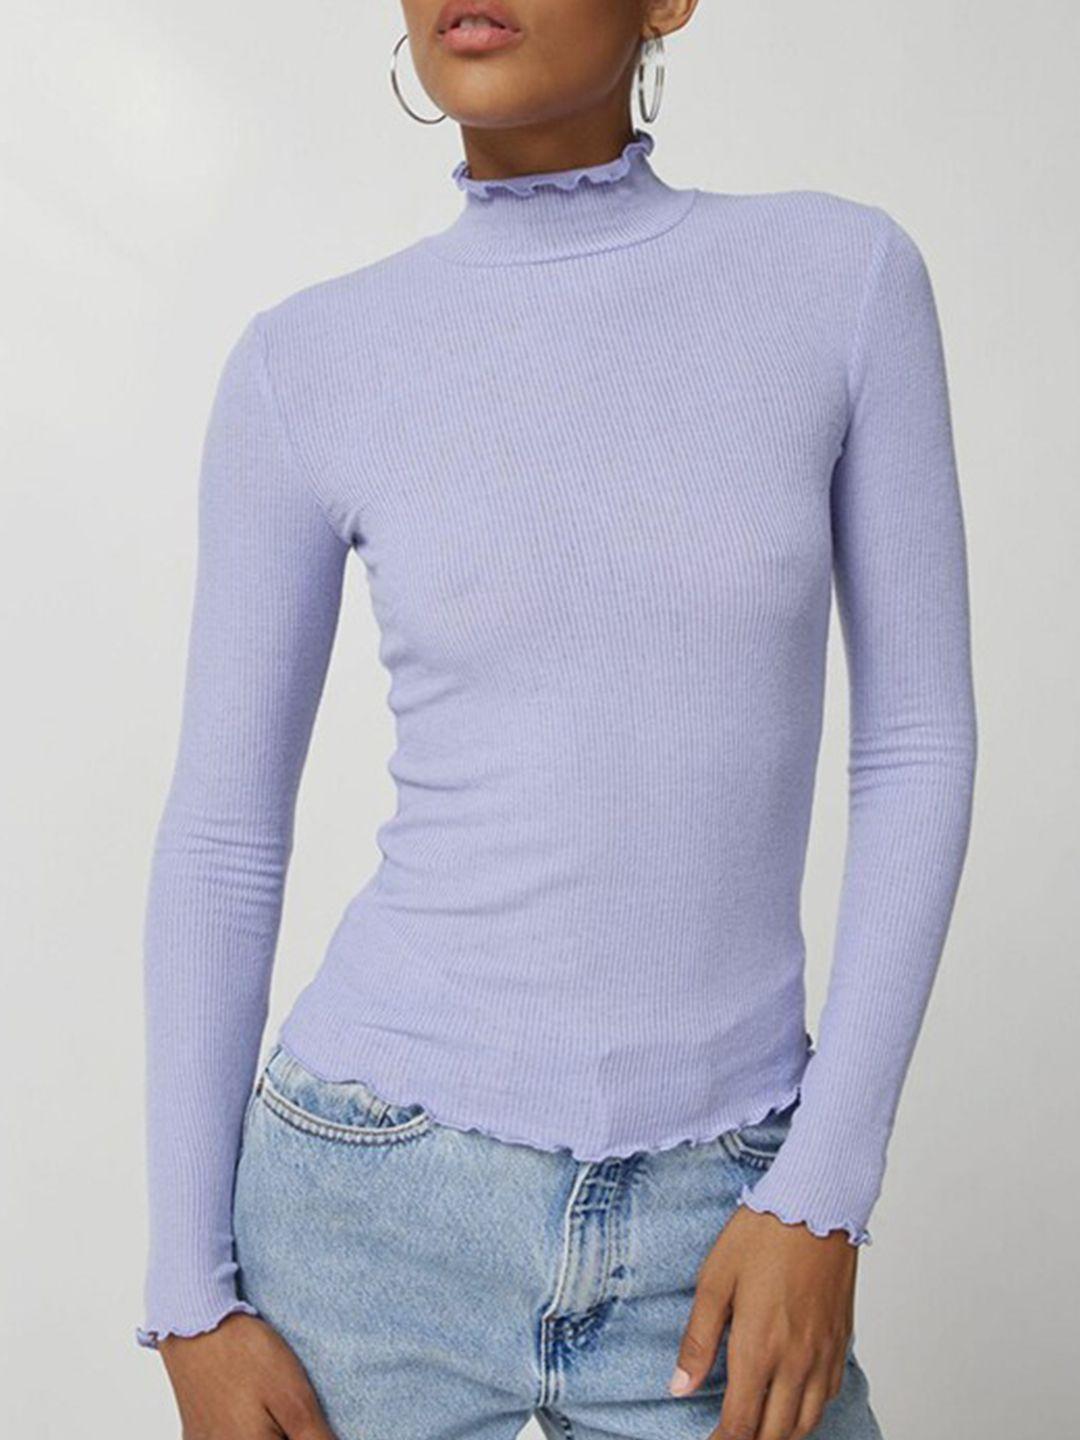 stylecast purple ribbed high neck fitted top